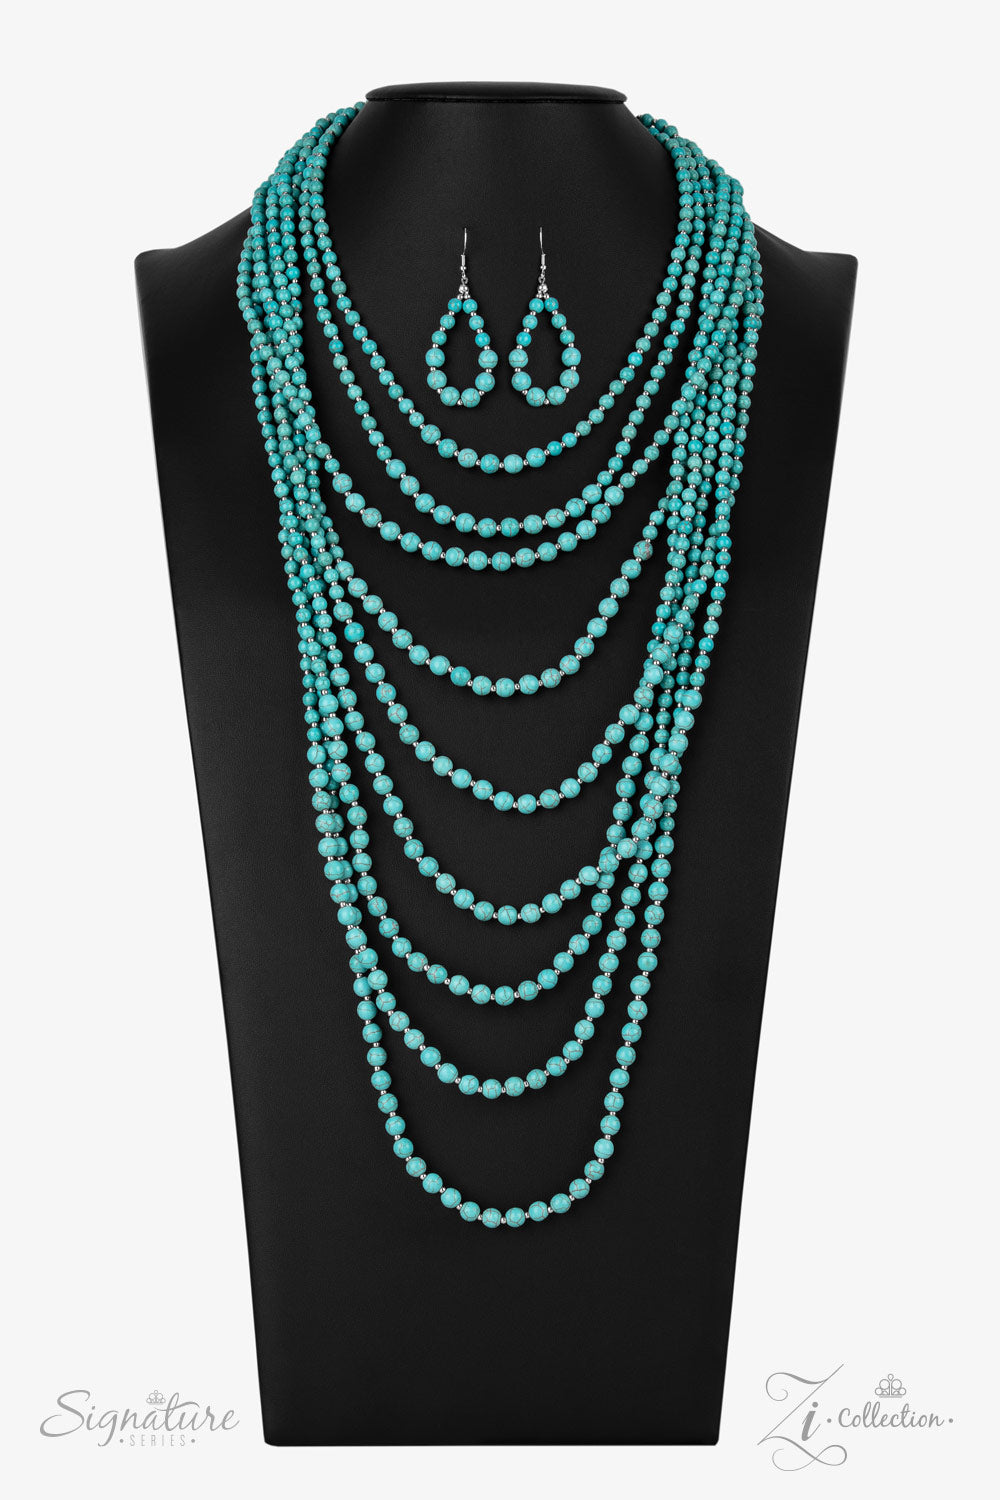 Intermixed with dainty silver beads, a groundbreaking display of refreshing turquoise stone beads gradually increases in size as they drape into artisan inspired layers down the chest. The trailblazing length combined with the authentic attitude of the piece creates an exaggerated, earthy statement. Features an adjustable clasp closure.   All Paparazzi Accessories are lead free and nickel free!